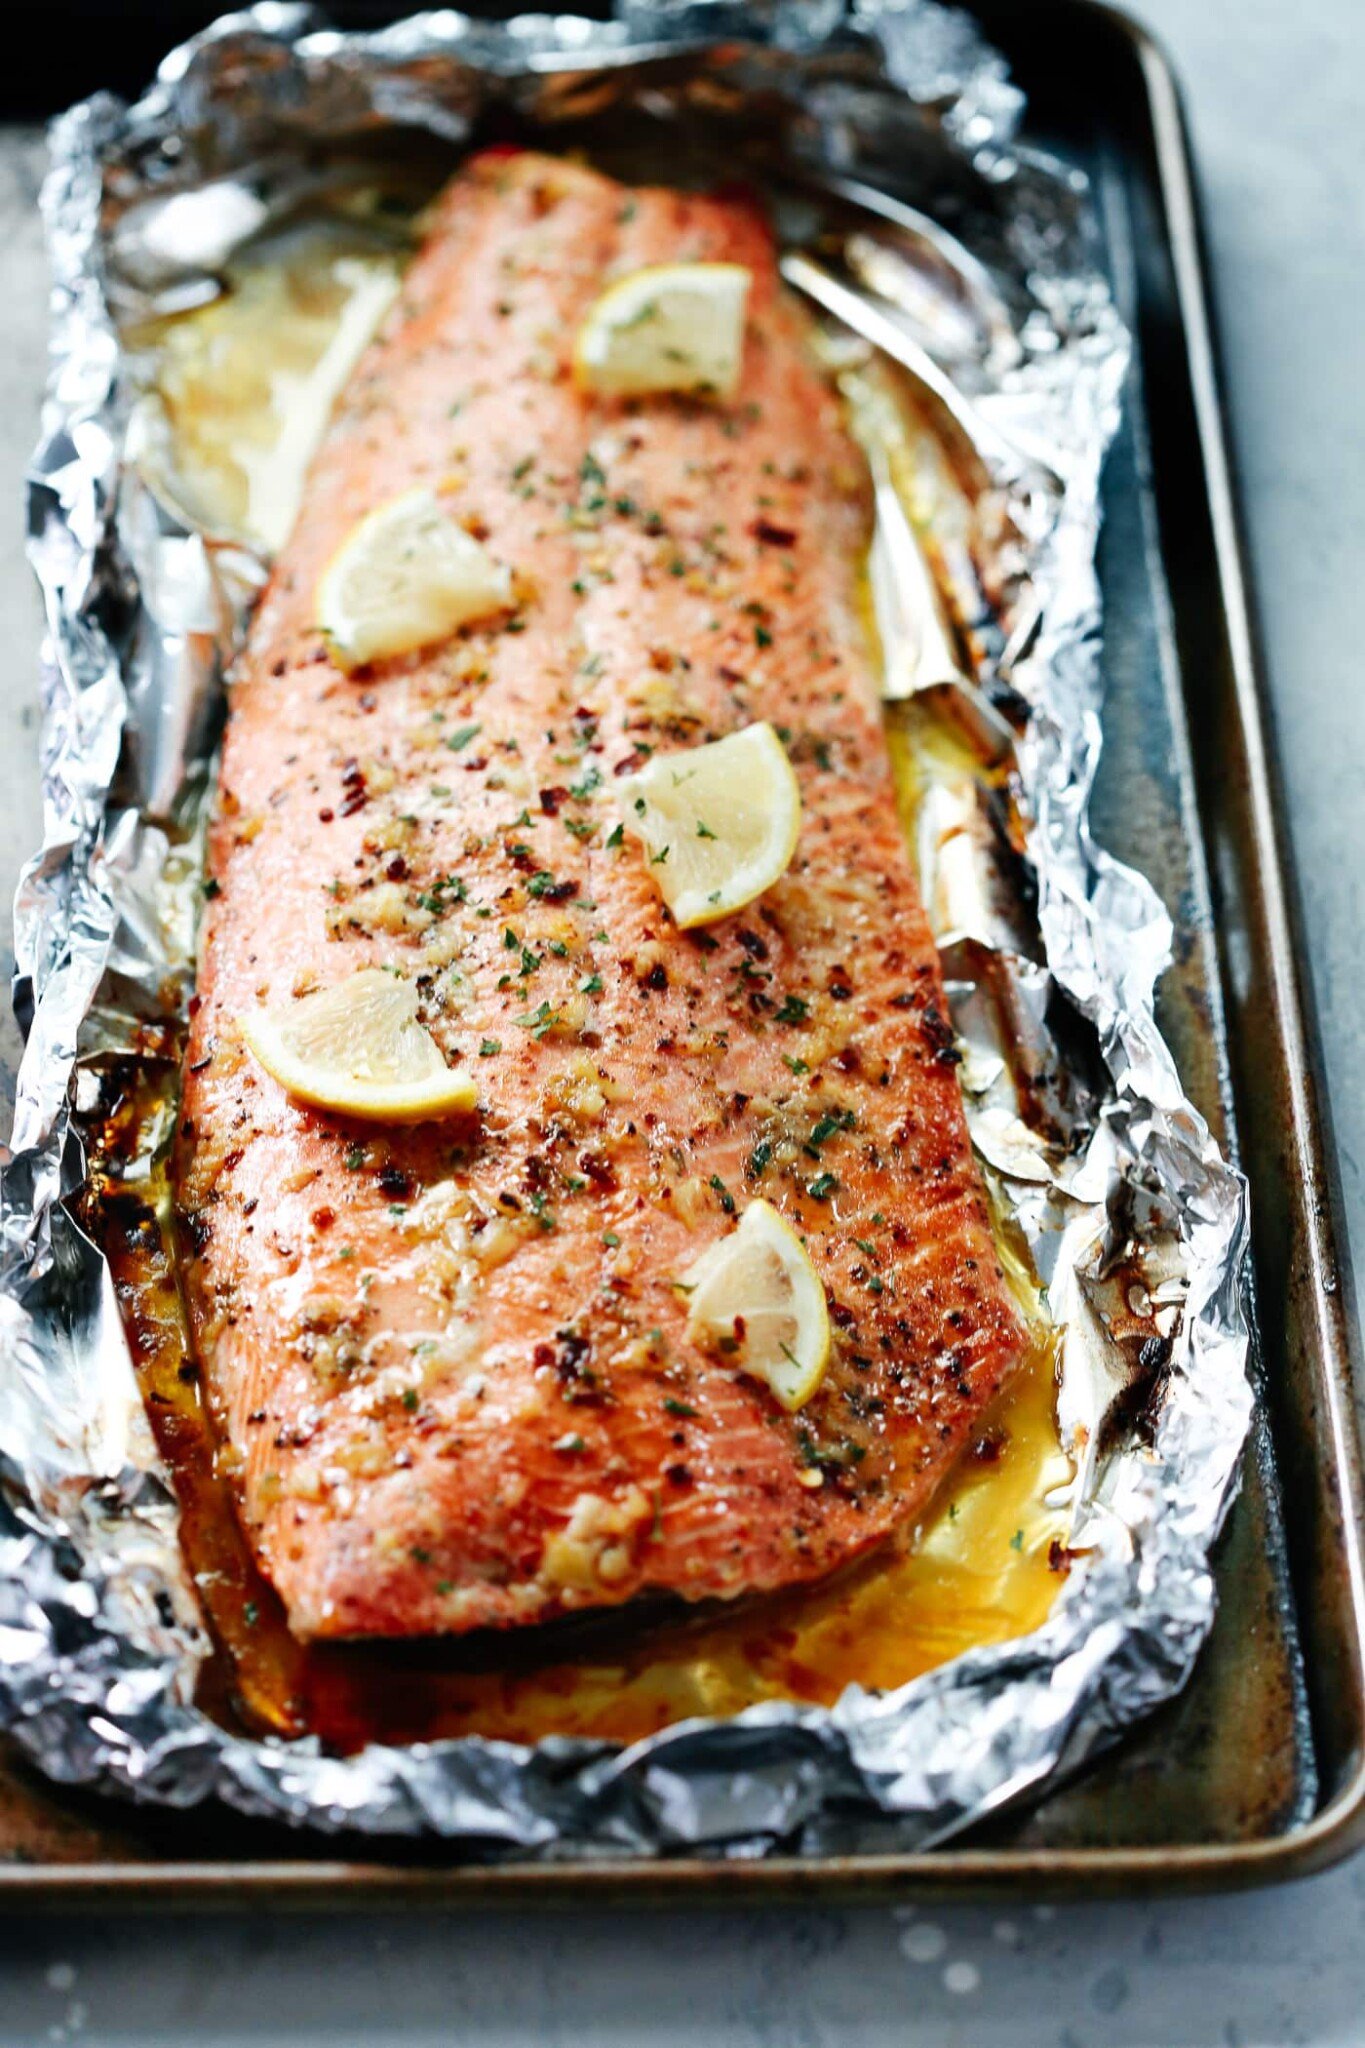 Baked Salmon Recipe with lemon slices and garlic butter 